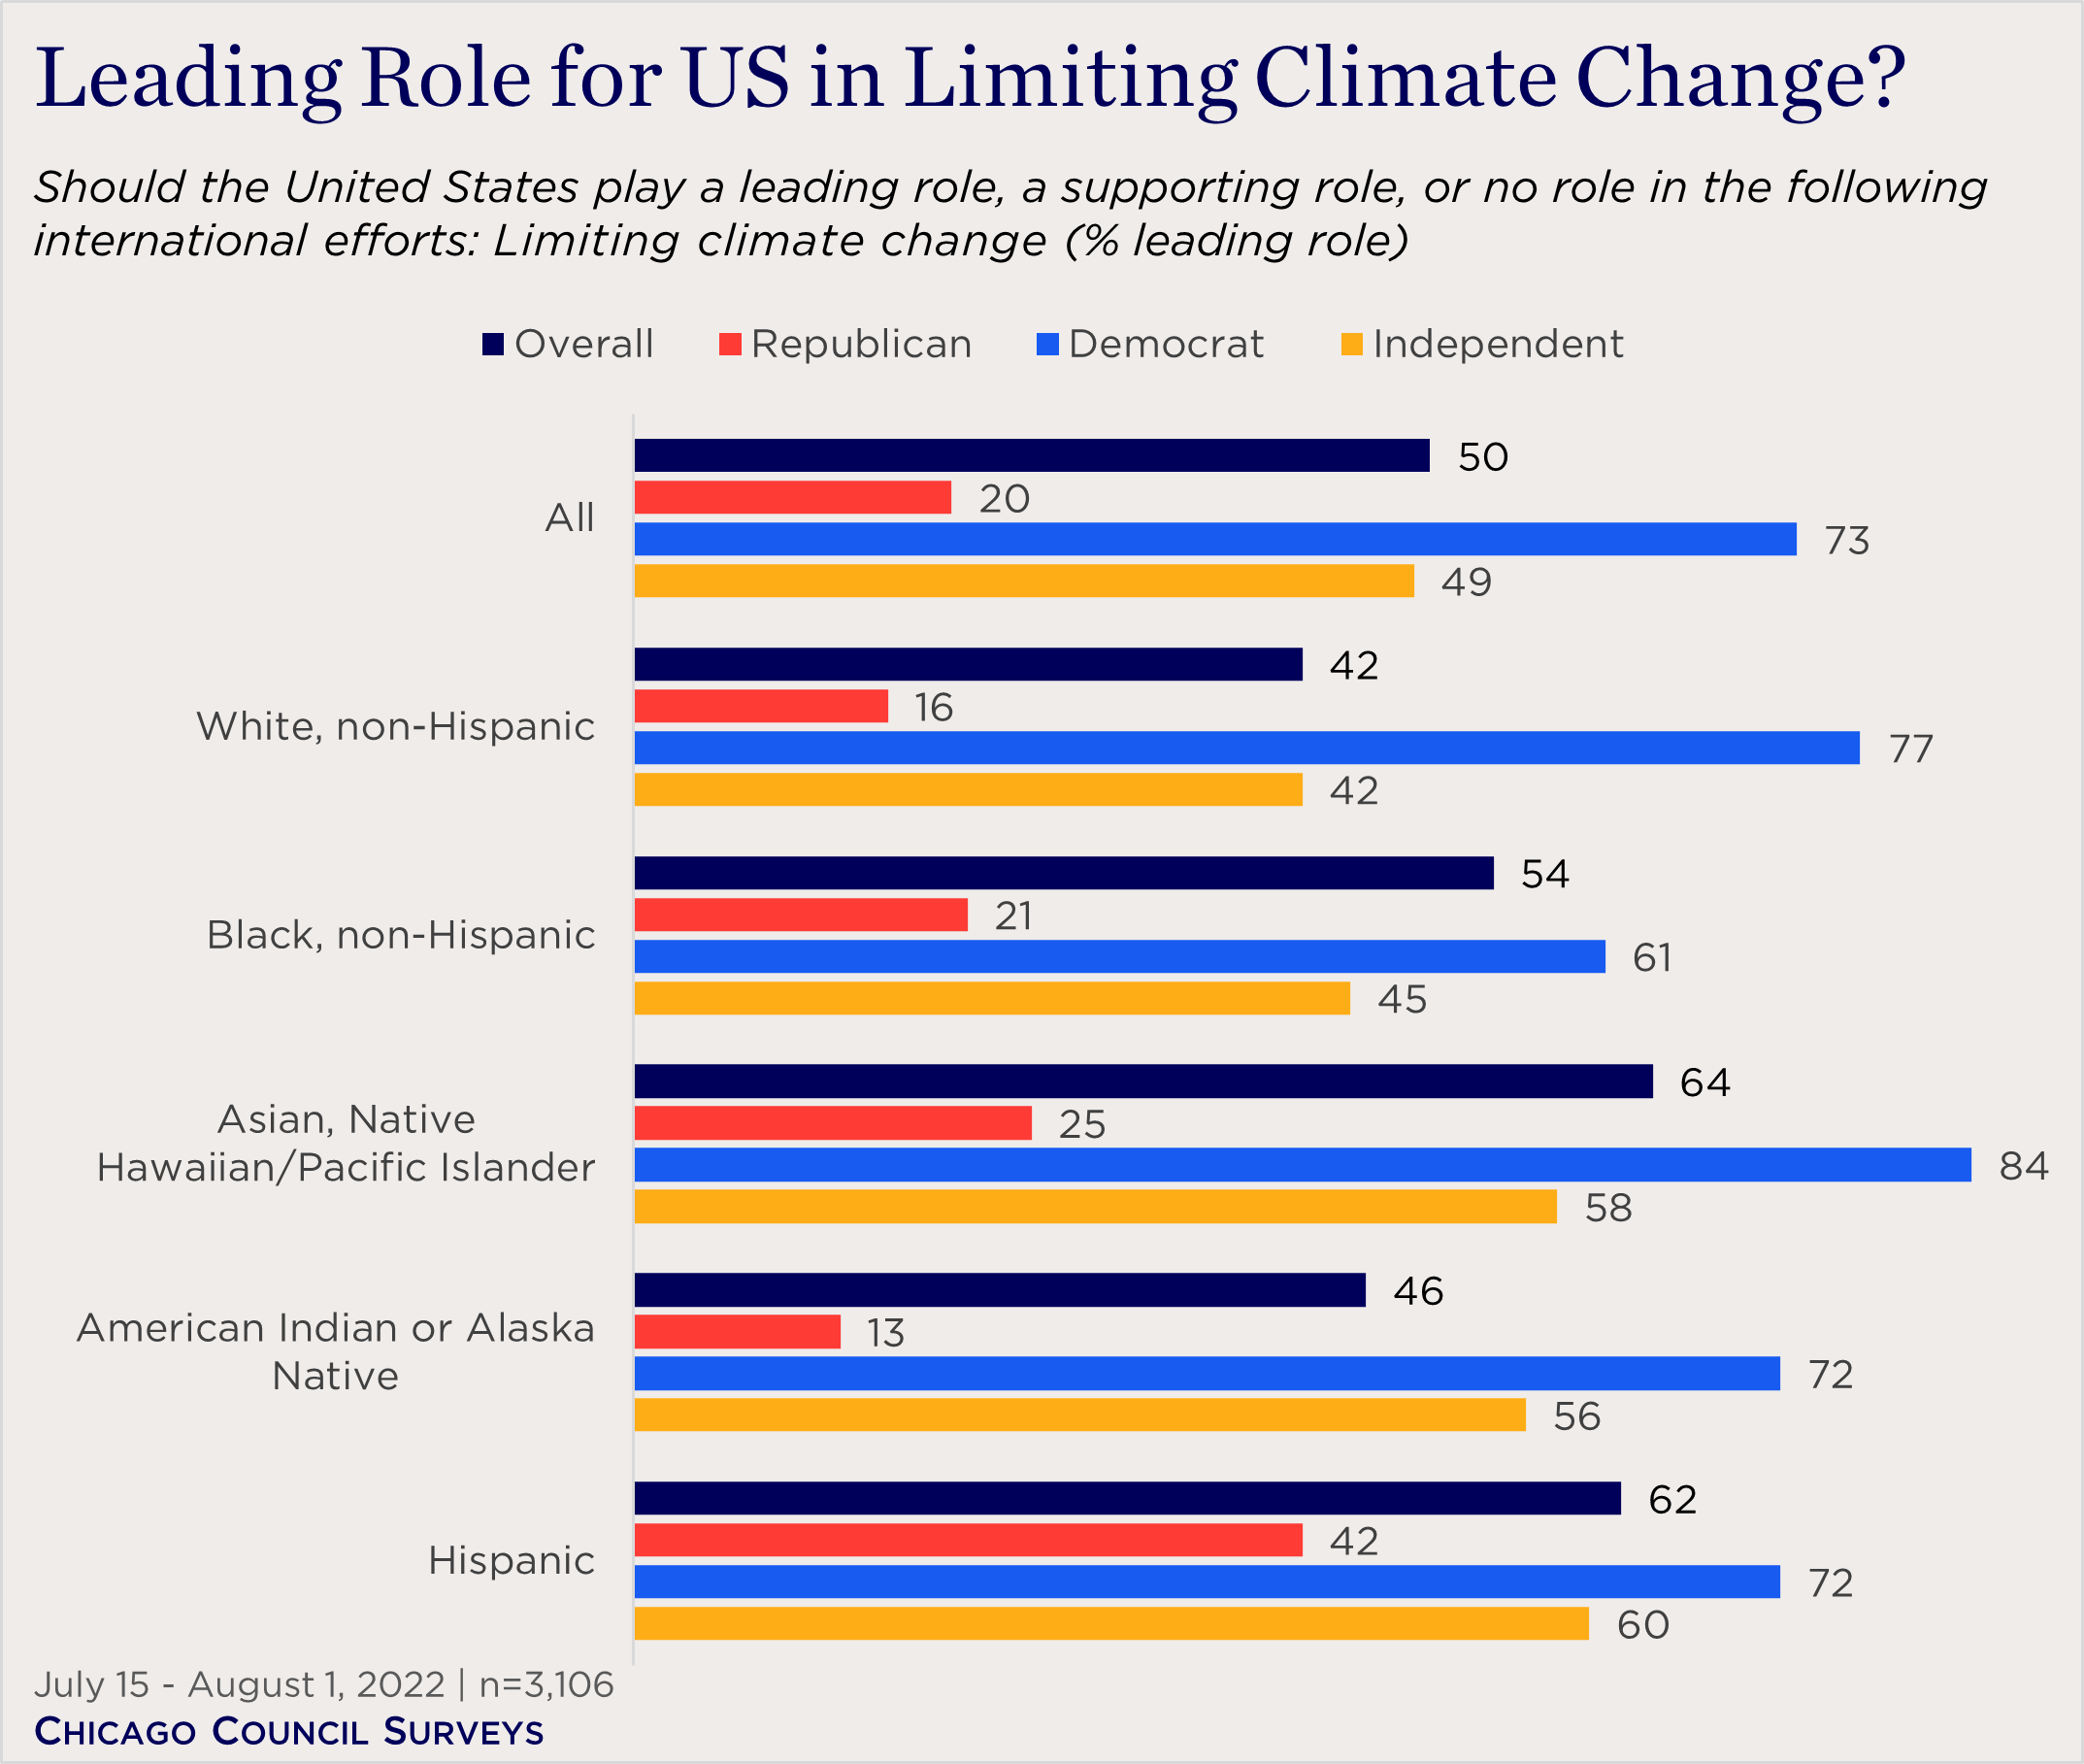 "bar chart showing views on US role in limiting climate change by race and party"